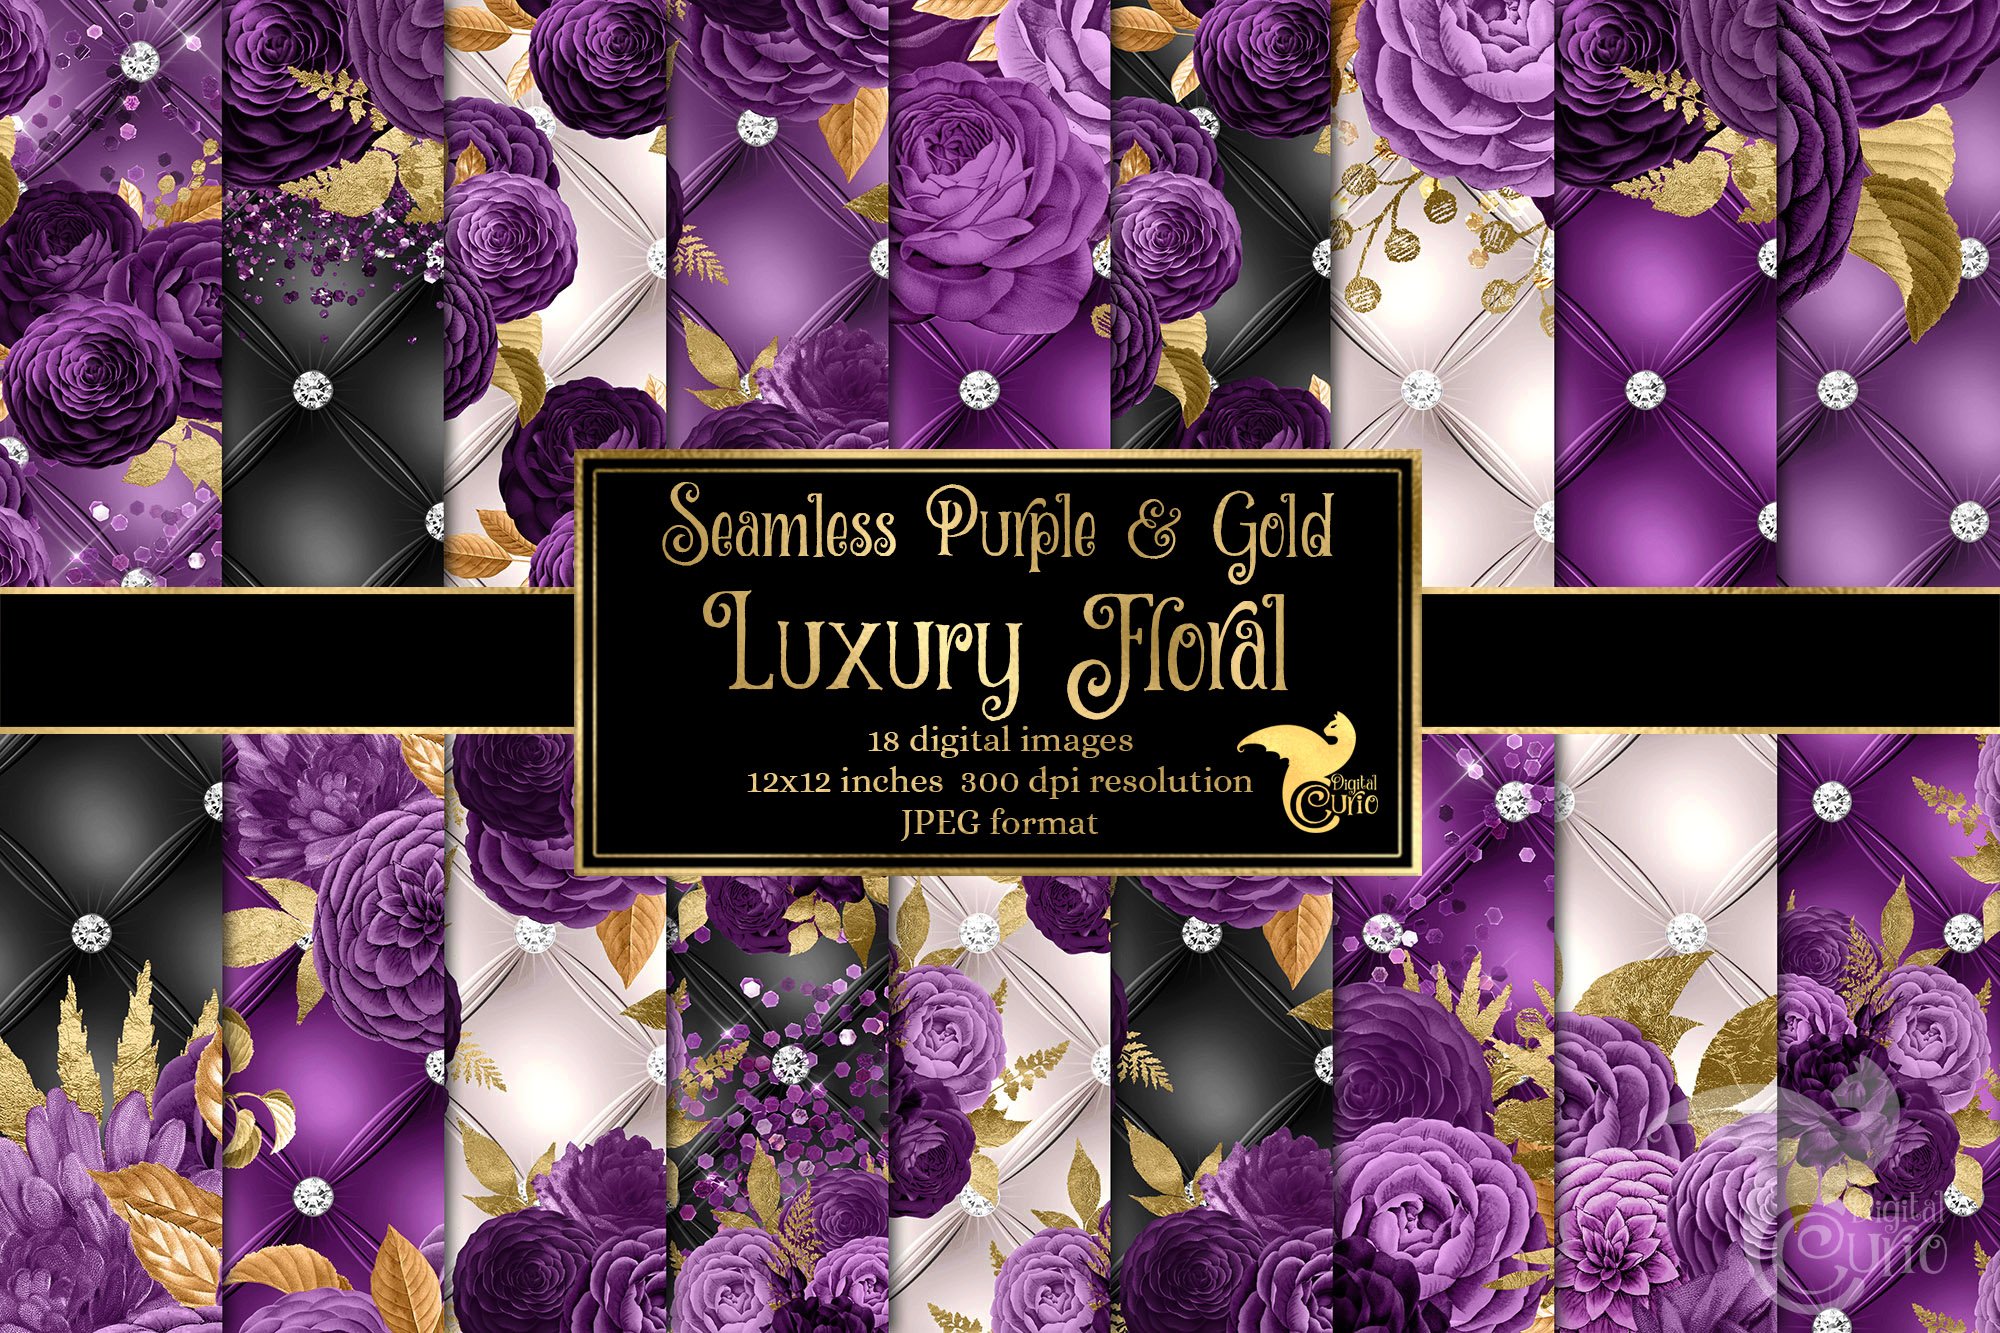 Purple and Gold Luxury Floral cover image.